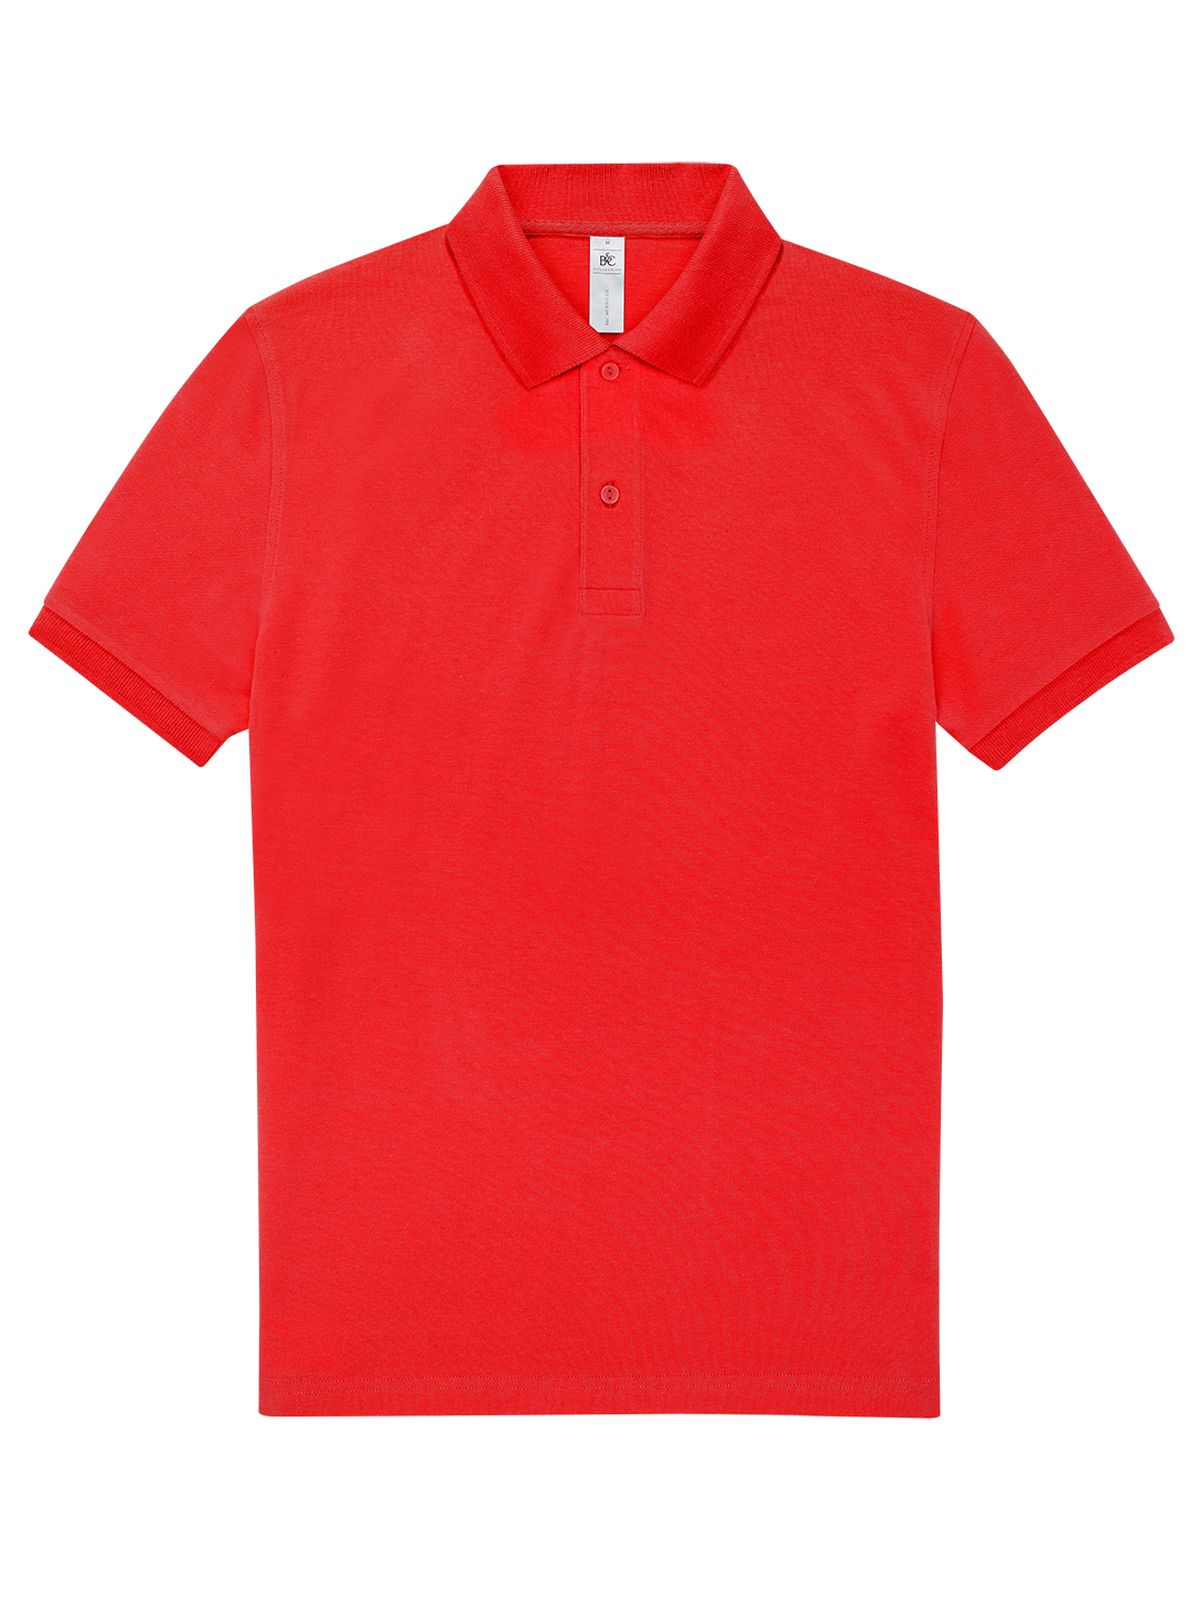 bc-my-polo-210-red.webp